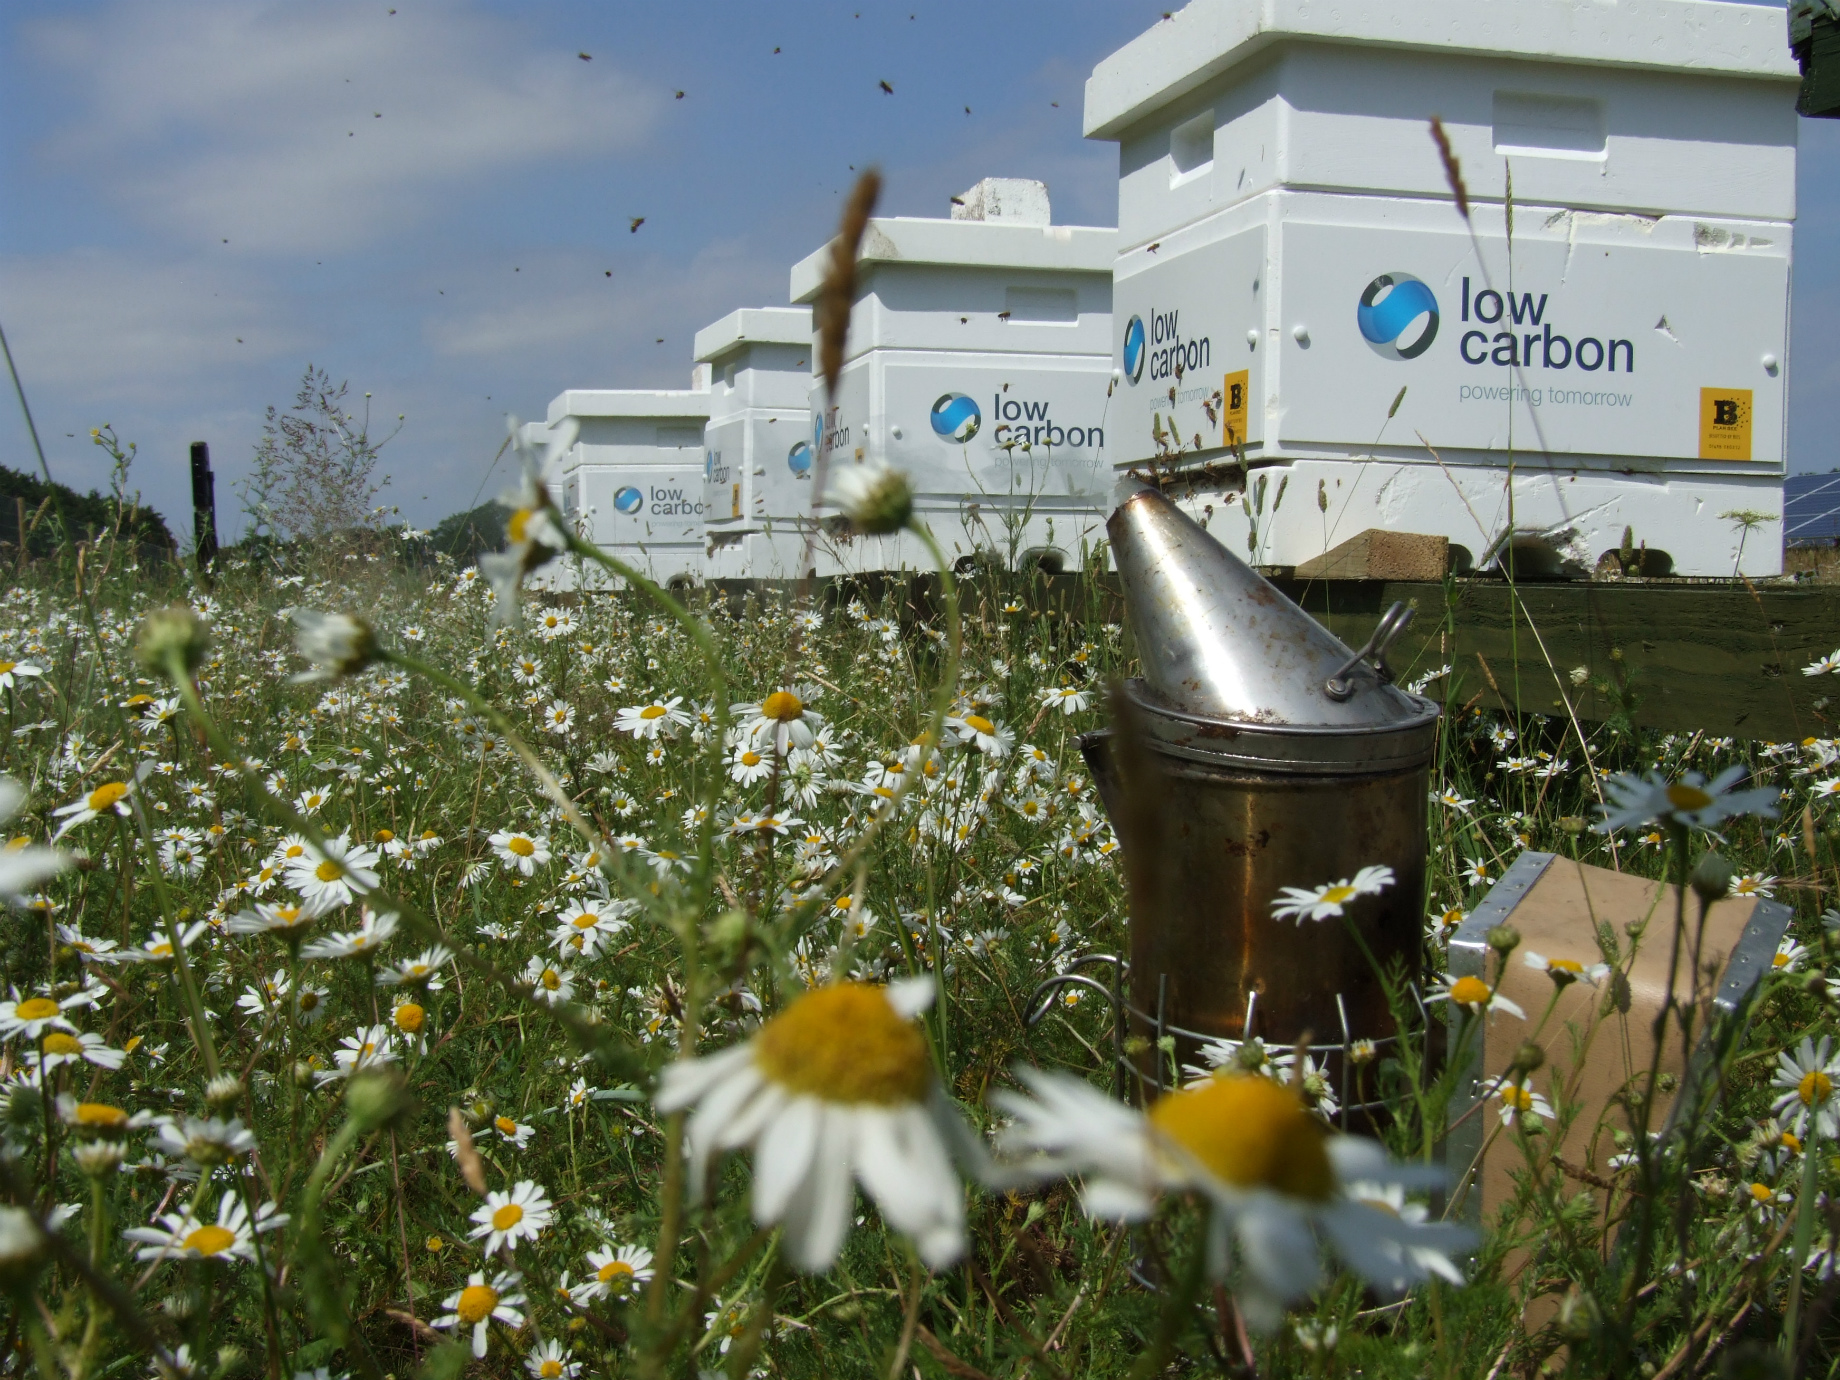 Low Carbon’s solution to saving the honeybee